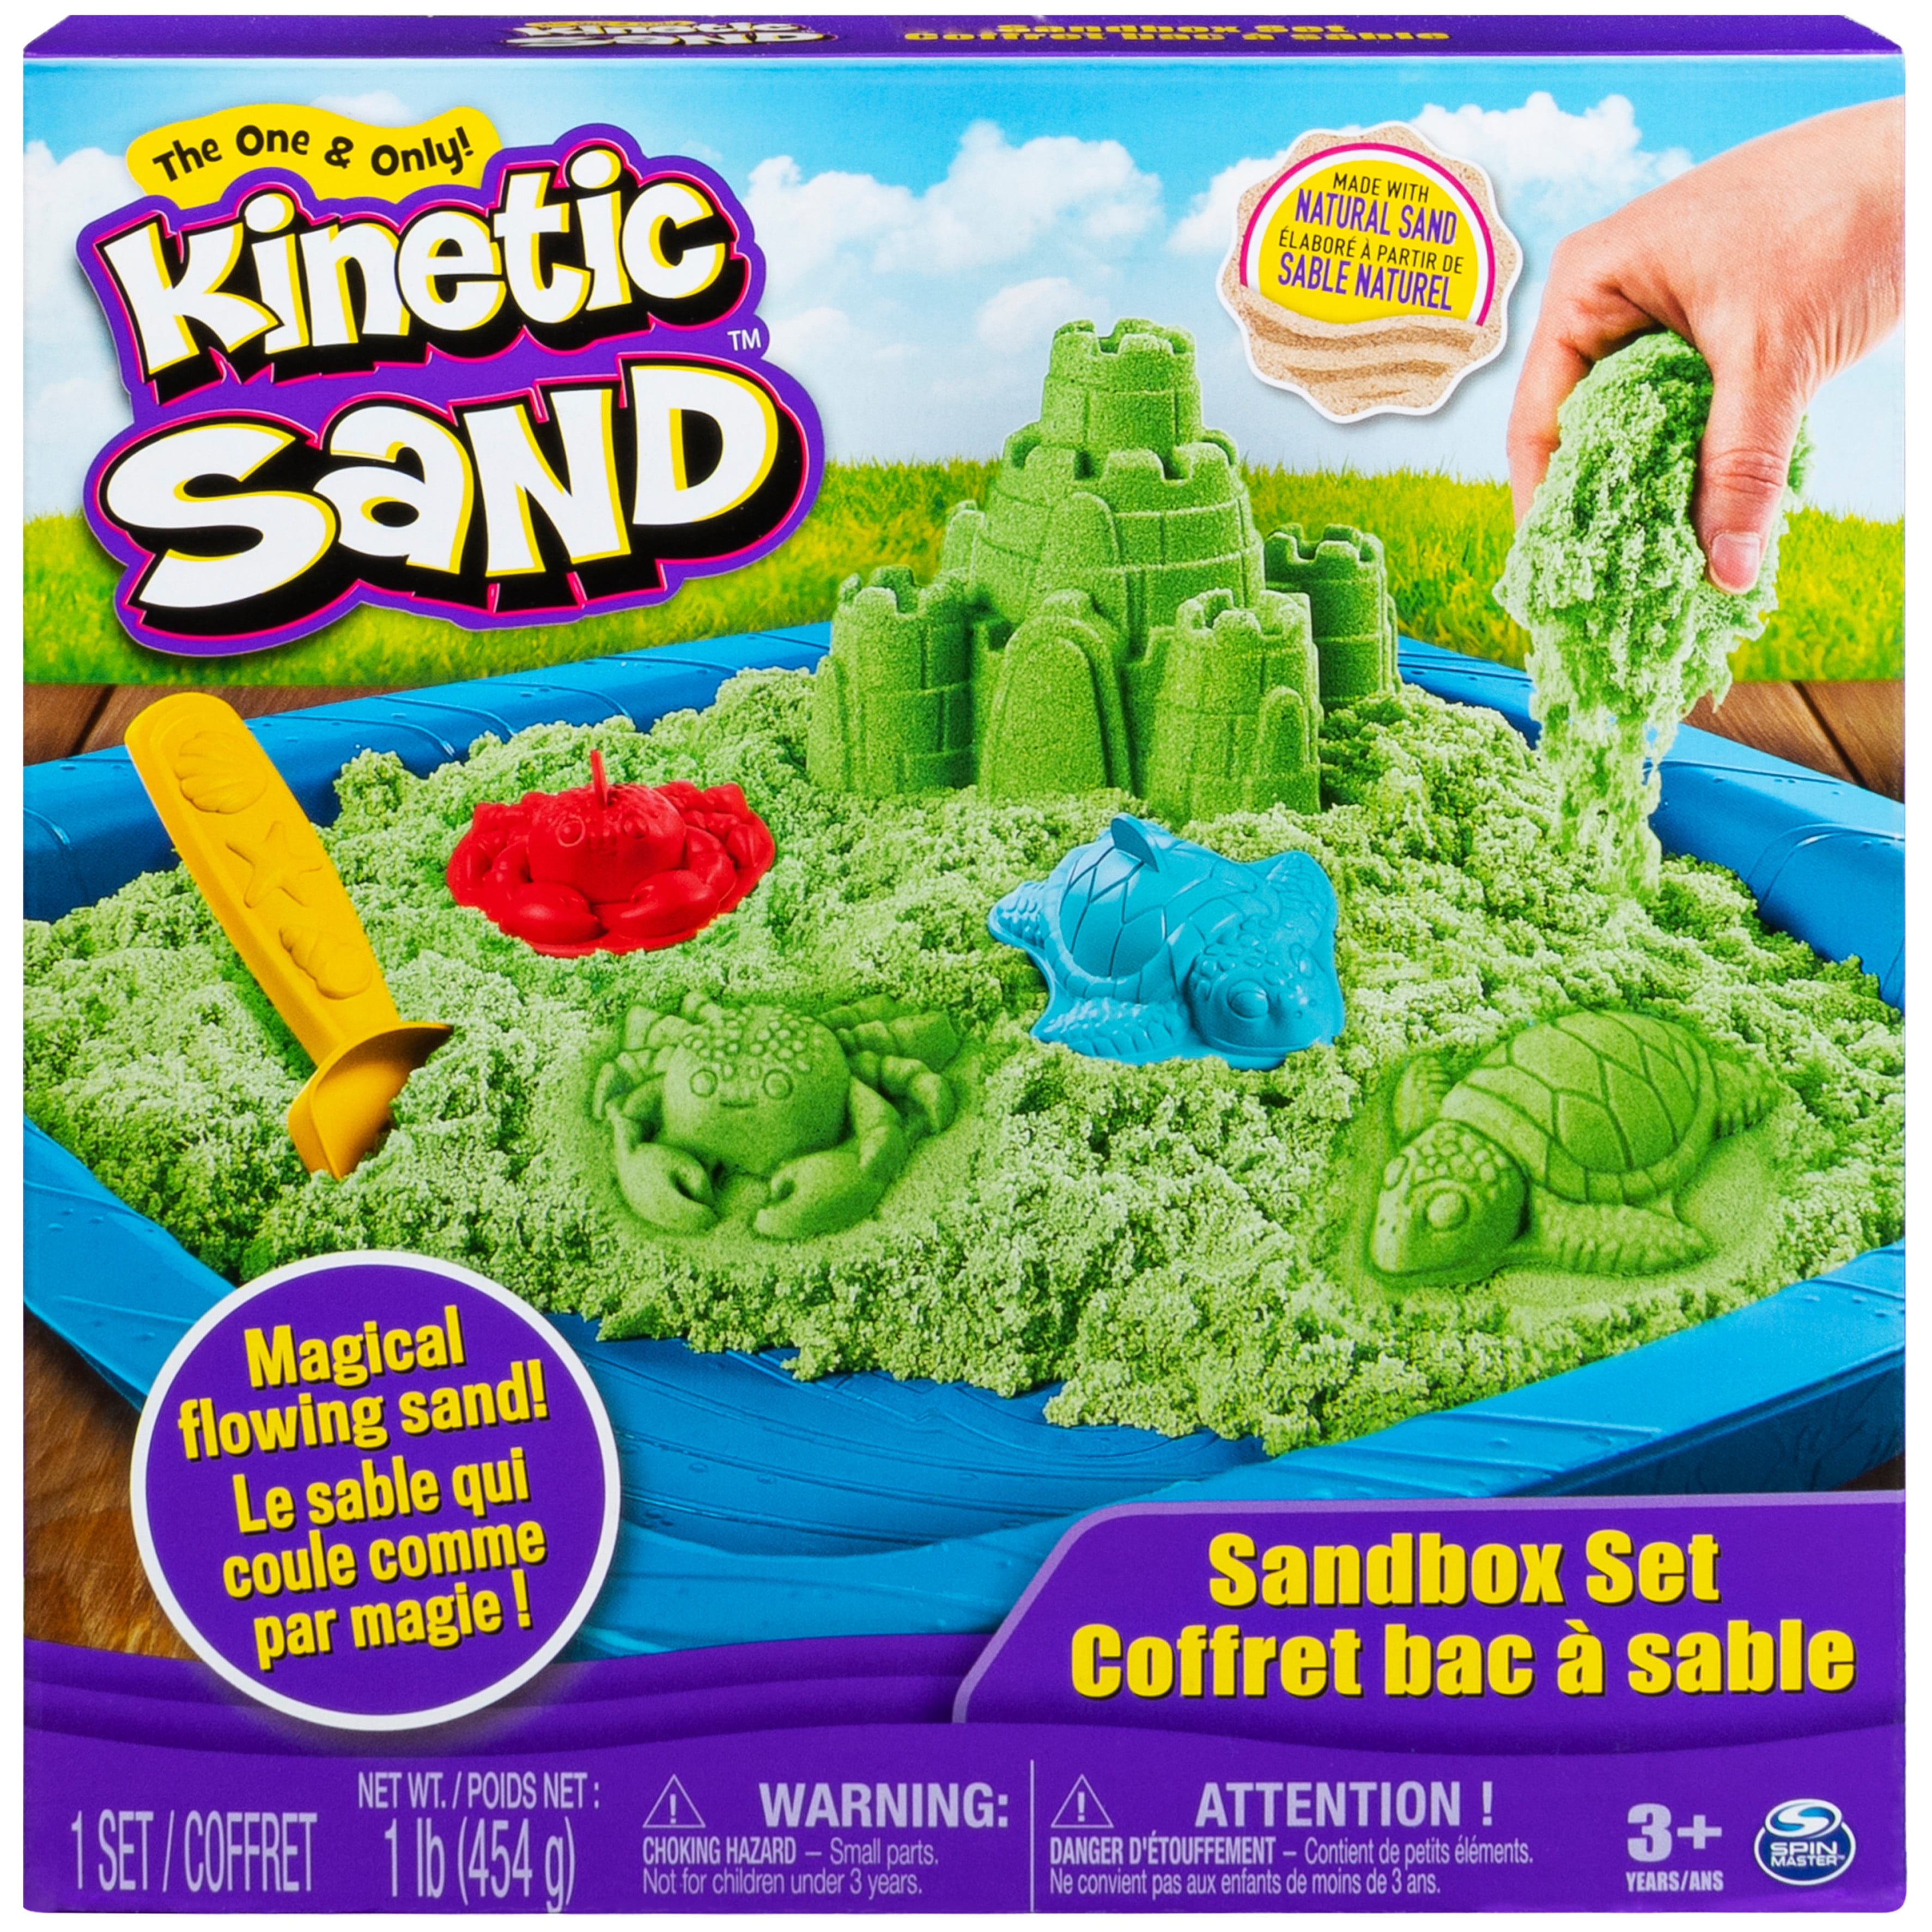 Kinetic Sand The One and Only 3lbs Beach Sand for Ages 3 and Up 